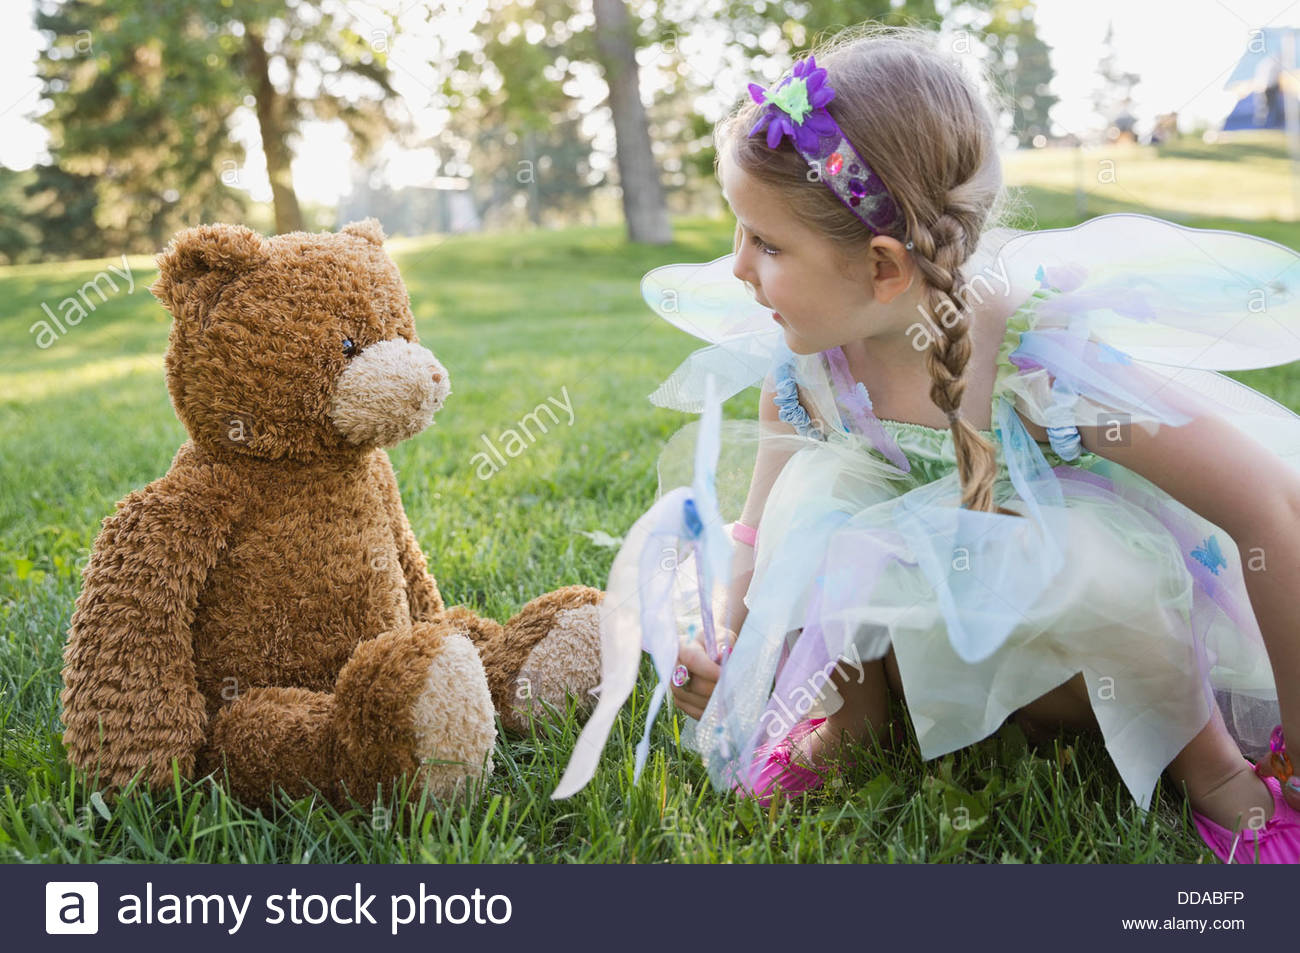 Little girl wearing fairy costume playing with teddy bear Stock Photo